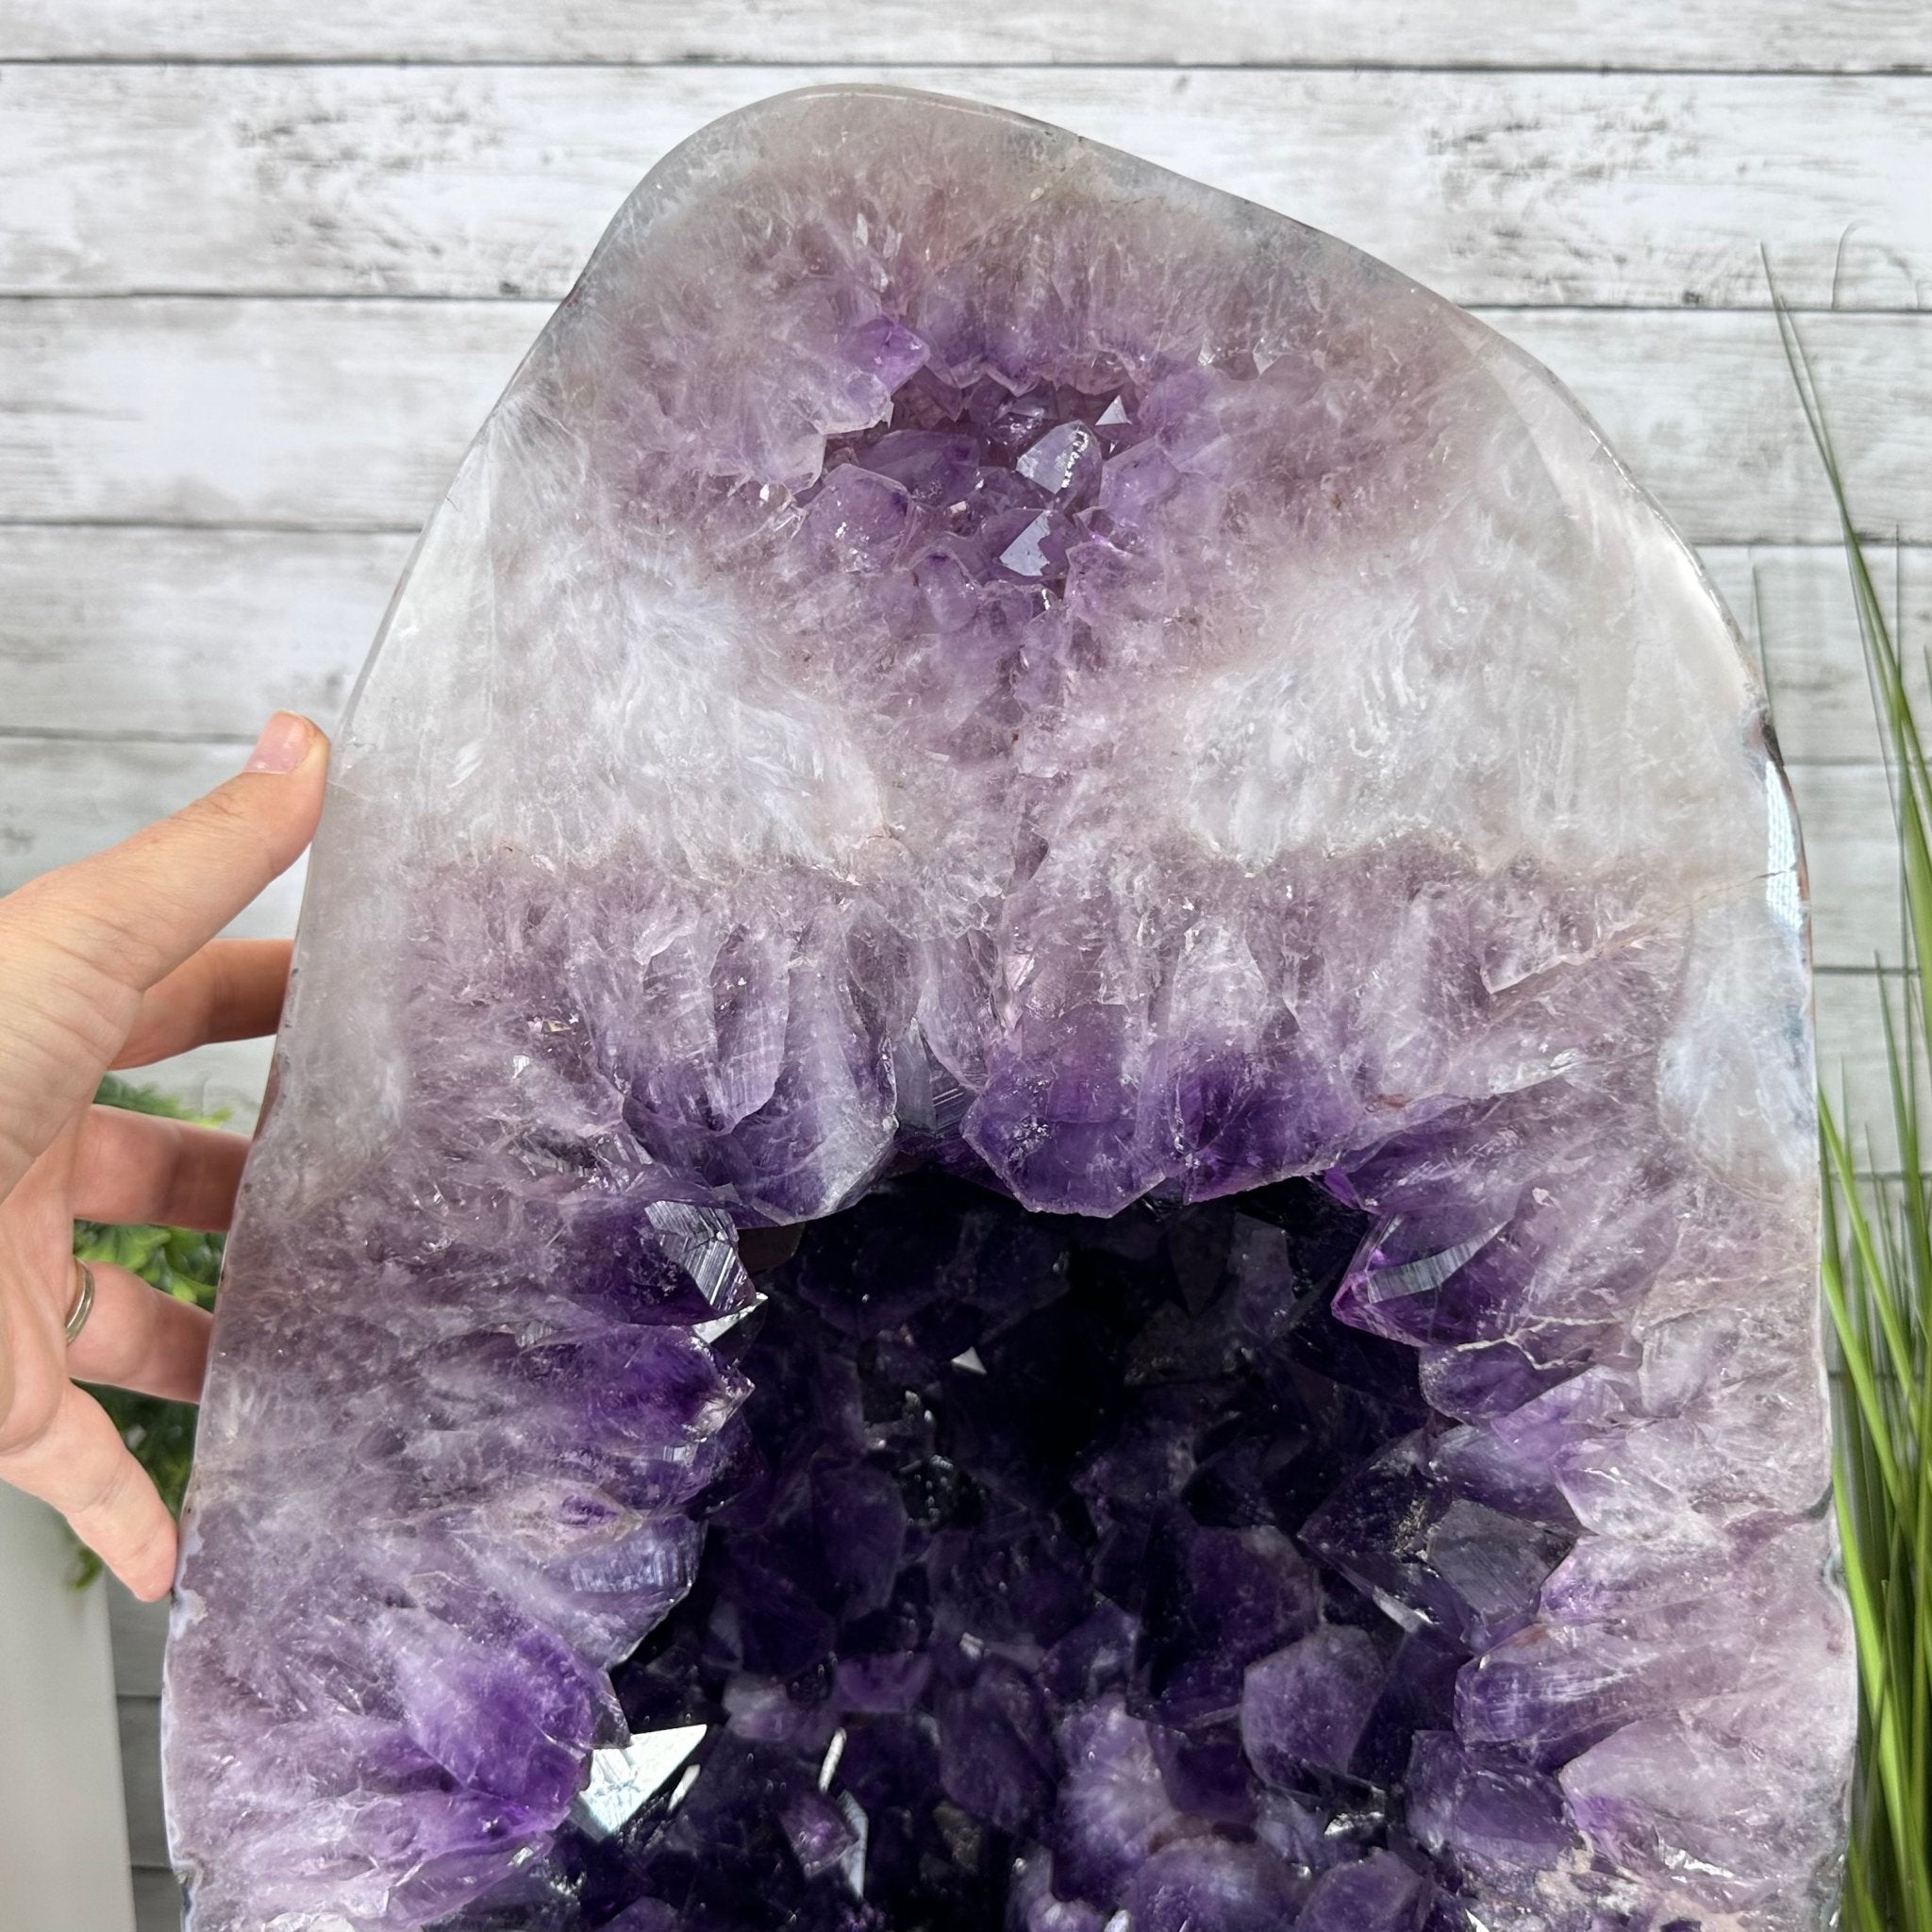 Extra Plus Quality Polished Brazilian Amethyst Cathedral, 165.3 lbs & 25.25" tall Model #5602-0019 by Brazil Gems - Brazil GemsBrazil GemsExtra Plus Quality Polished Brazilian Amethyst Cathedral, 165.3 lbs & 25.25" tall Model #5602-0019 by Brazil GemsPolished Cathedrals5602-0019